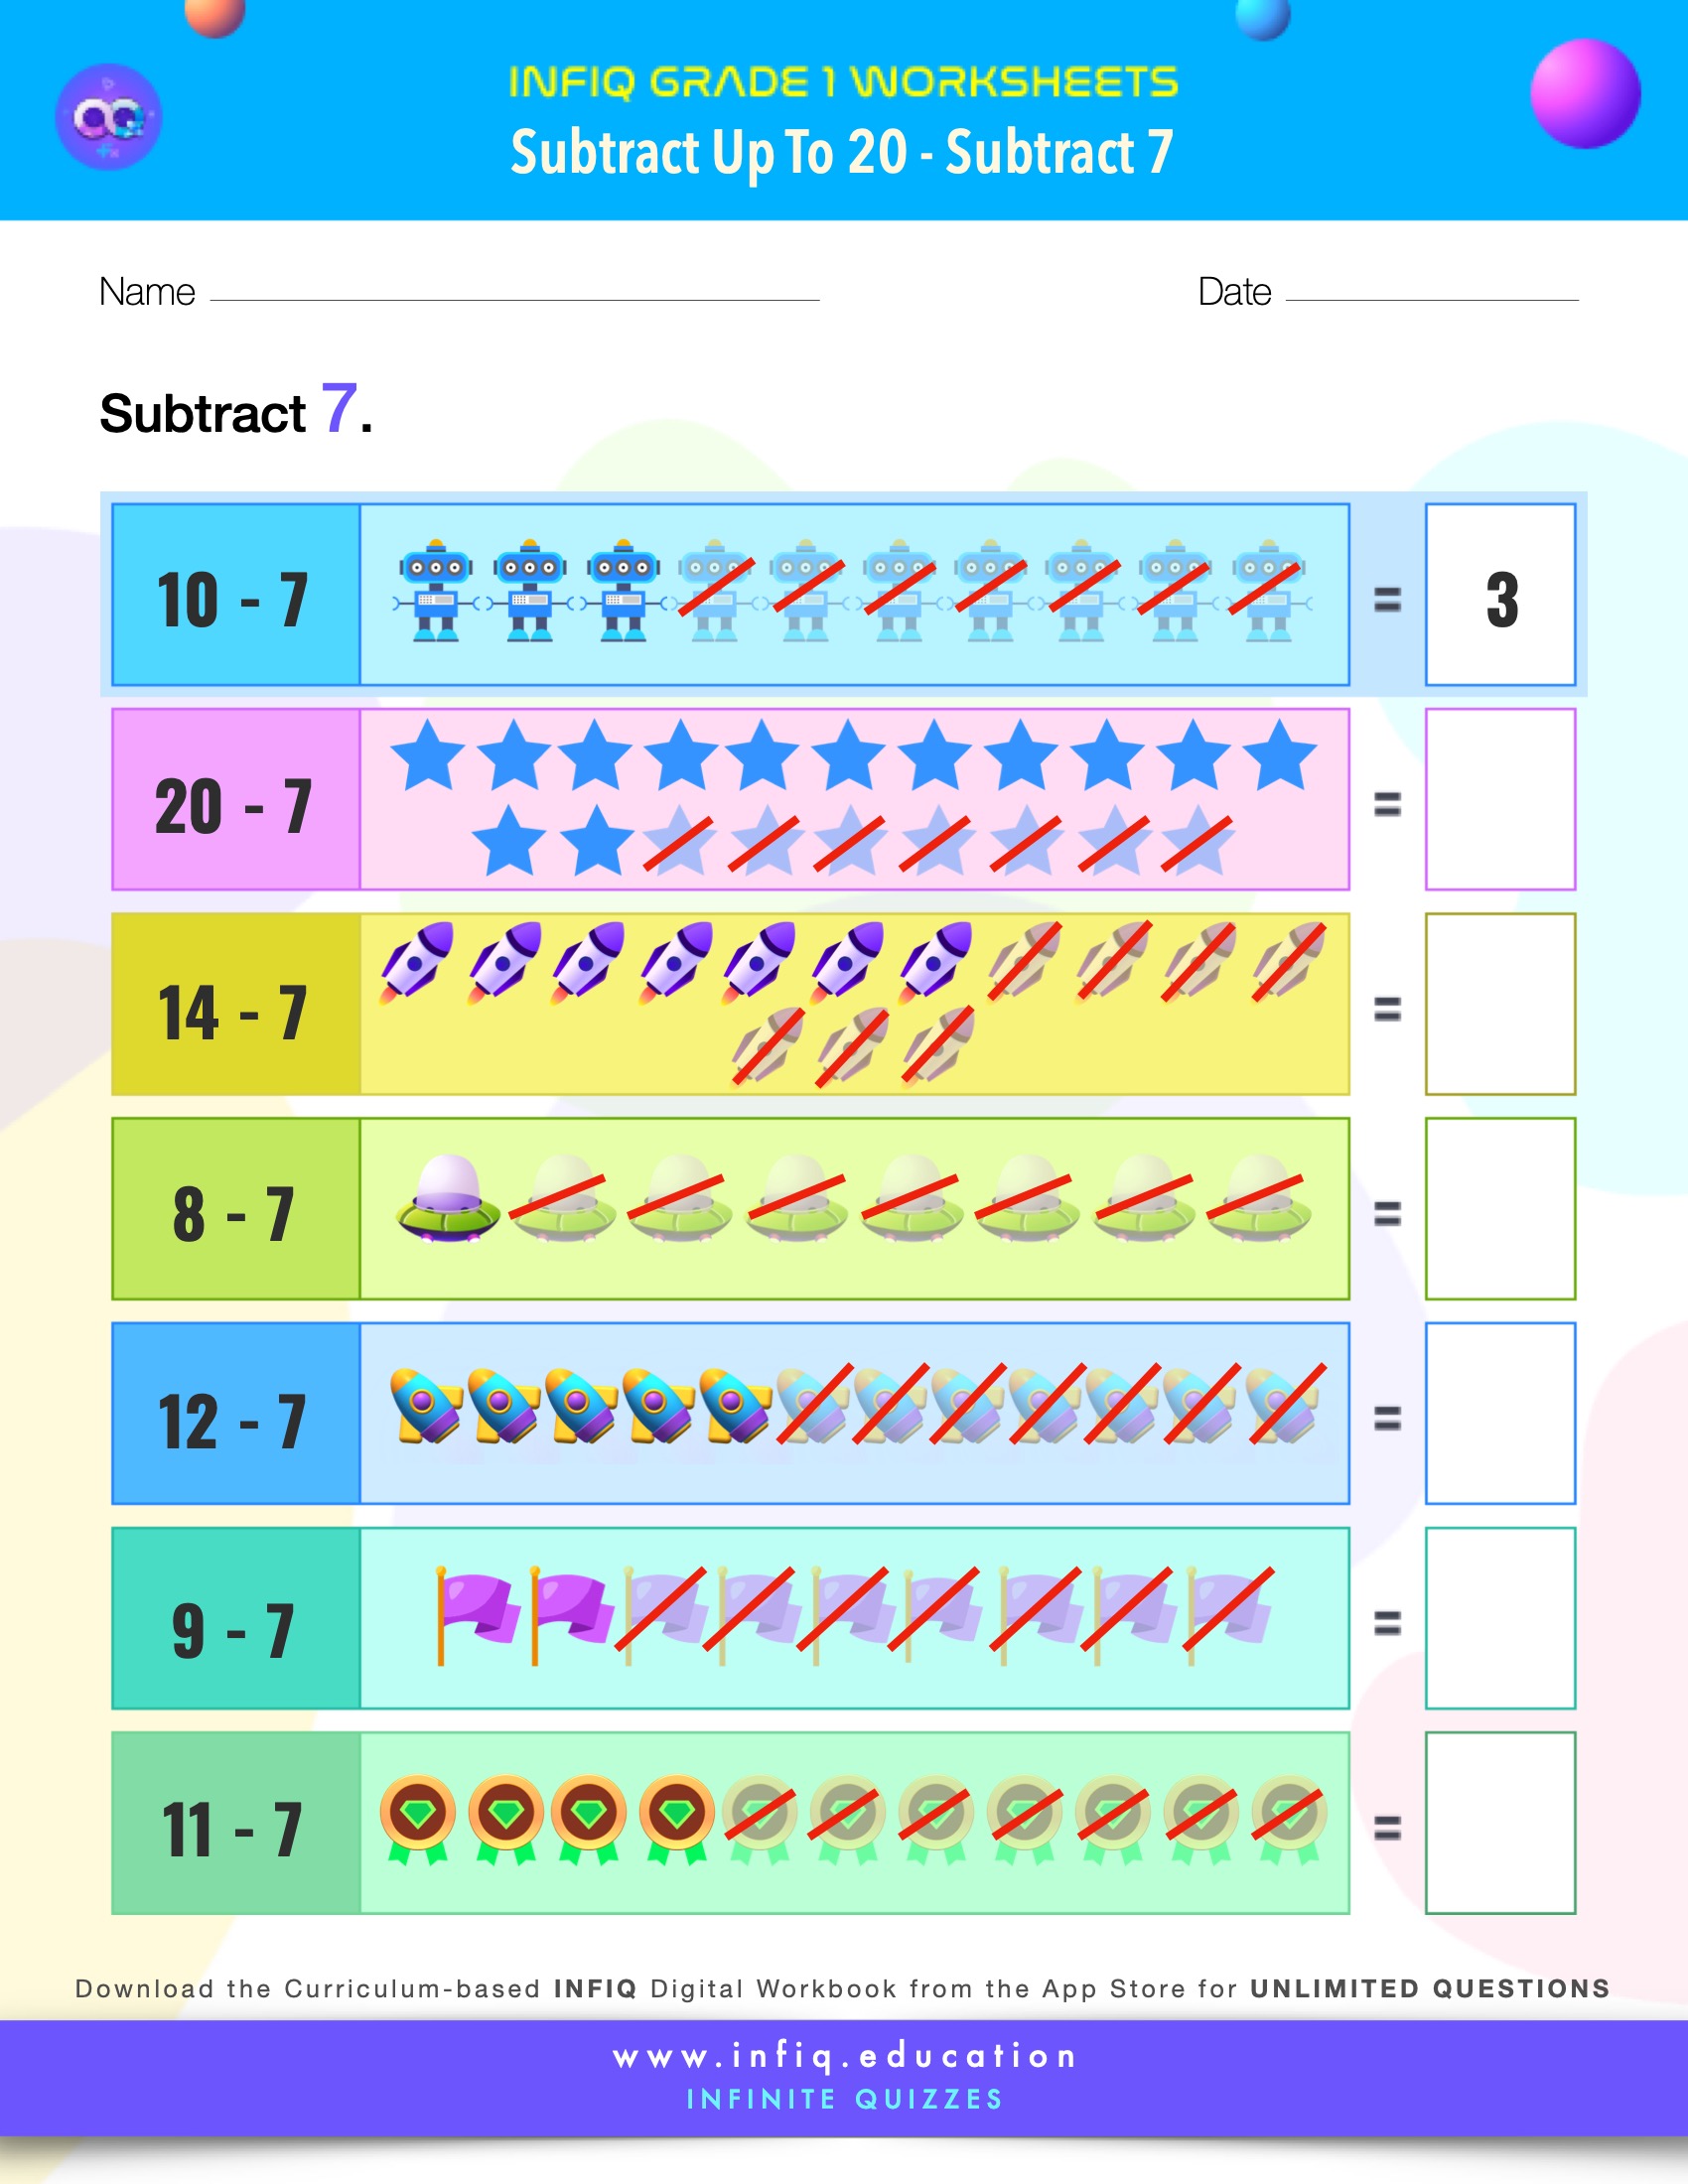 Grade 1 Math > Subtract up to 20 > Subtract 7 Worksheet